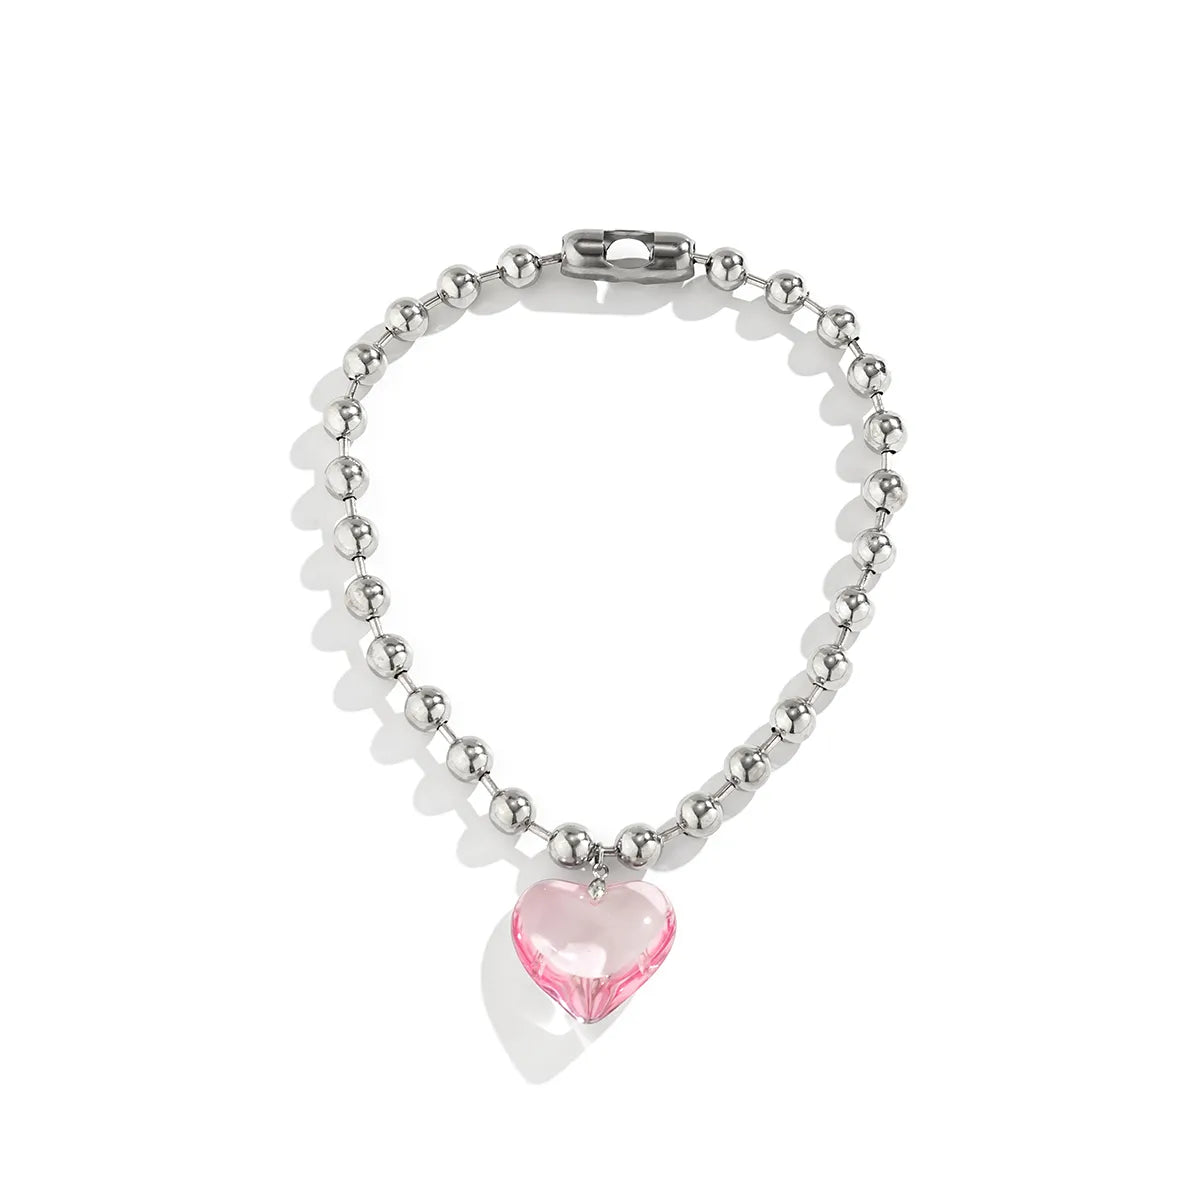 Big-Pearled Heart Necklace